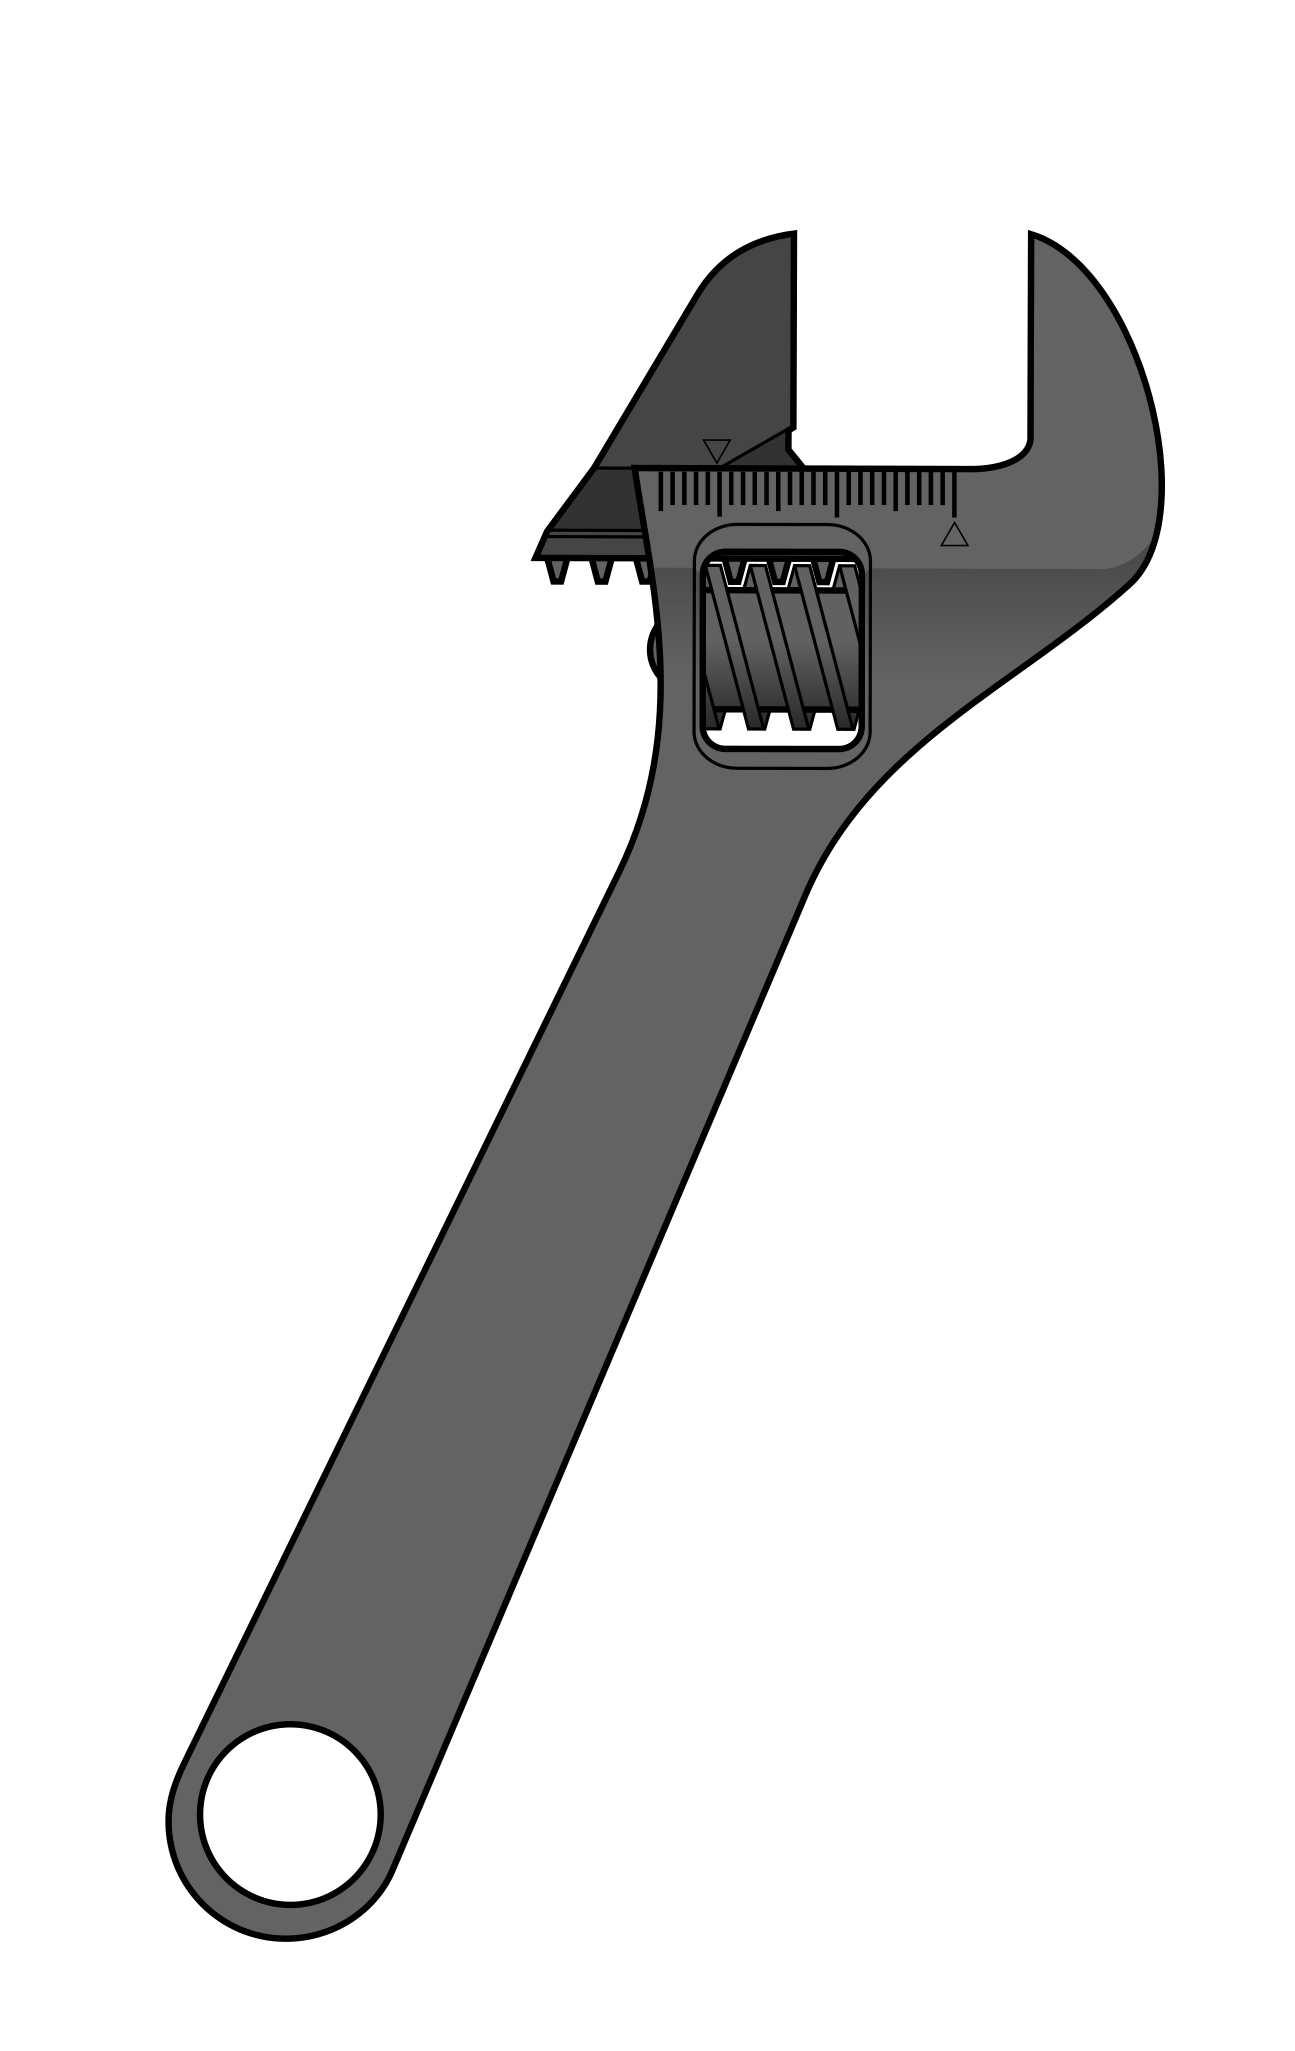 File:Adjustable wrench.svg - Wikipedia